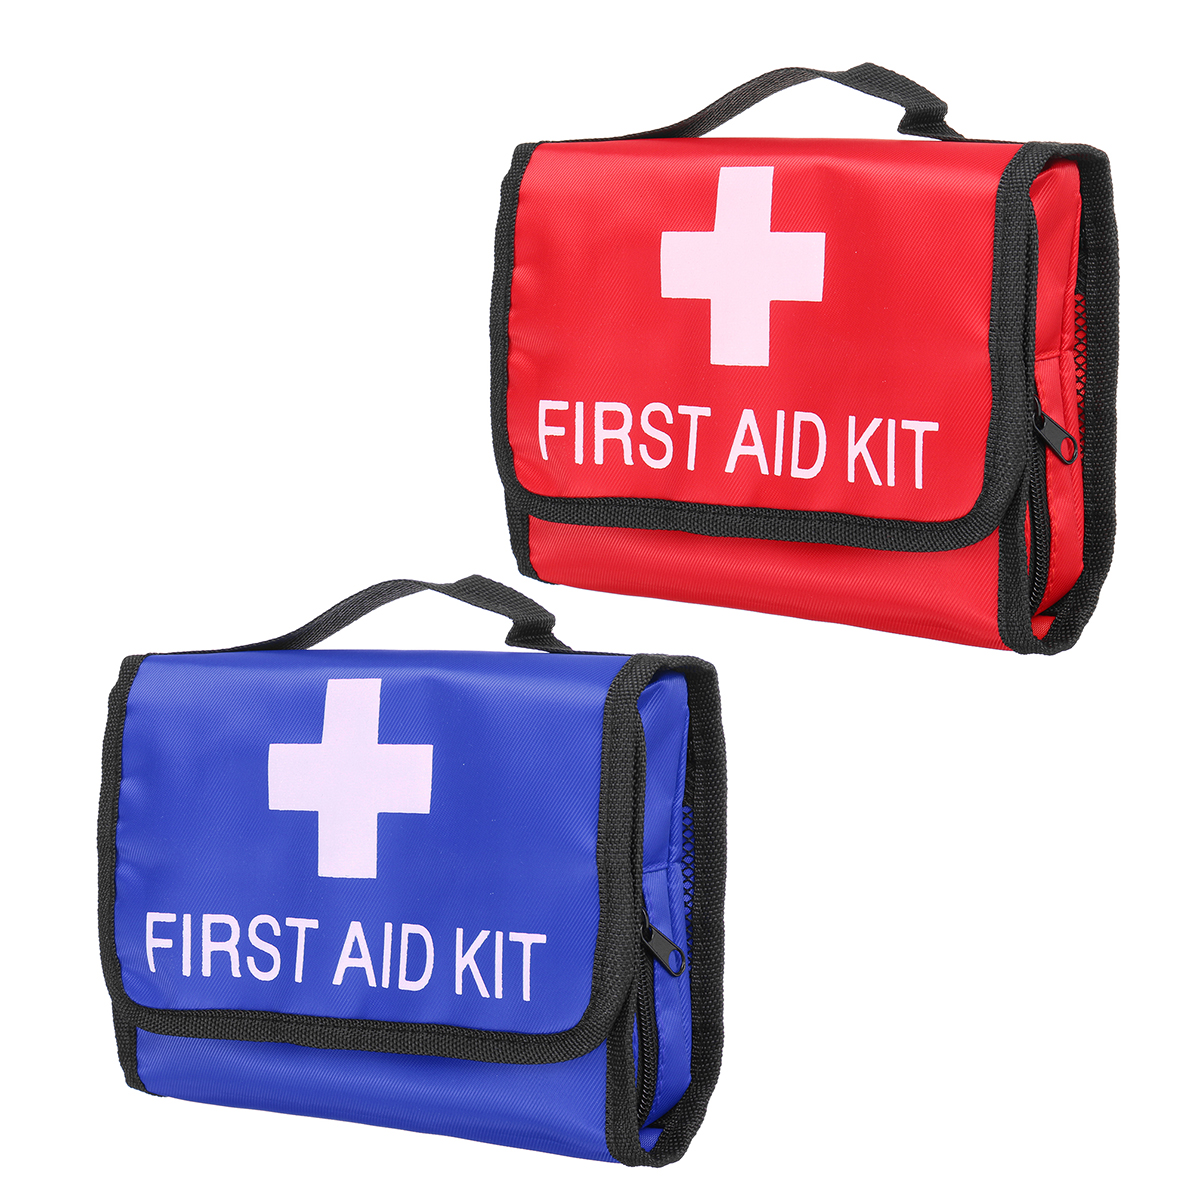 Outdoor-Portable-First-Aid-Kit-Medical-Storage-Bag-Waterproof-Car-Carrying-Household-Emergency-Kit-T-1757235-5